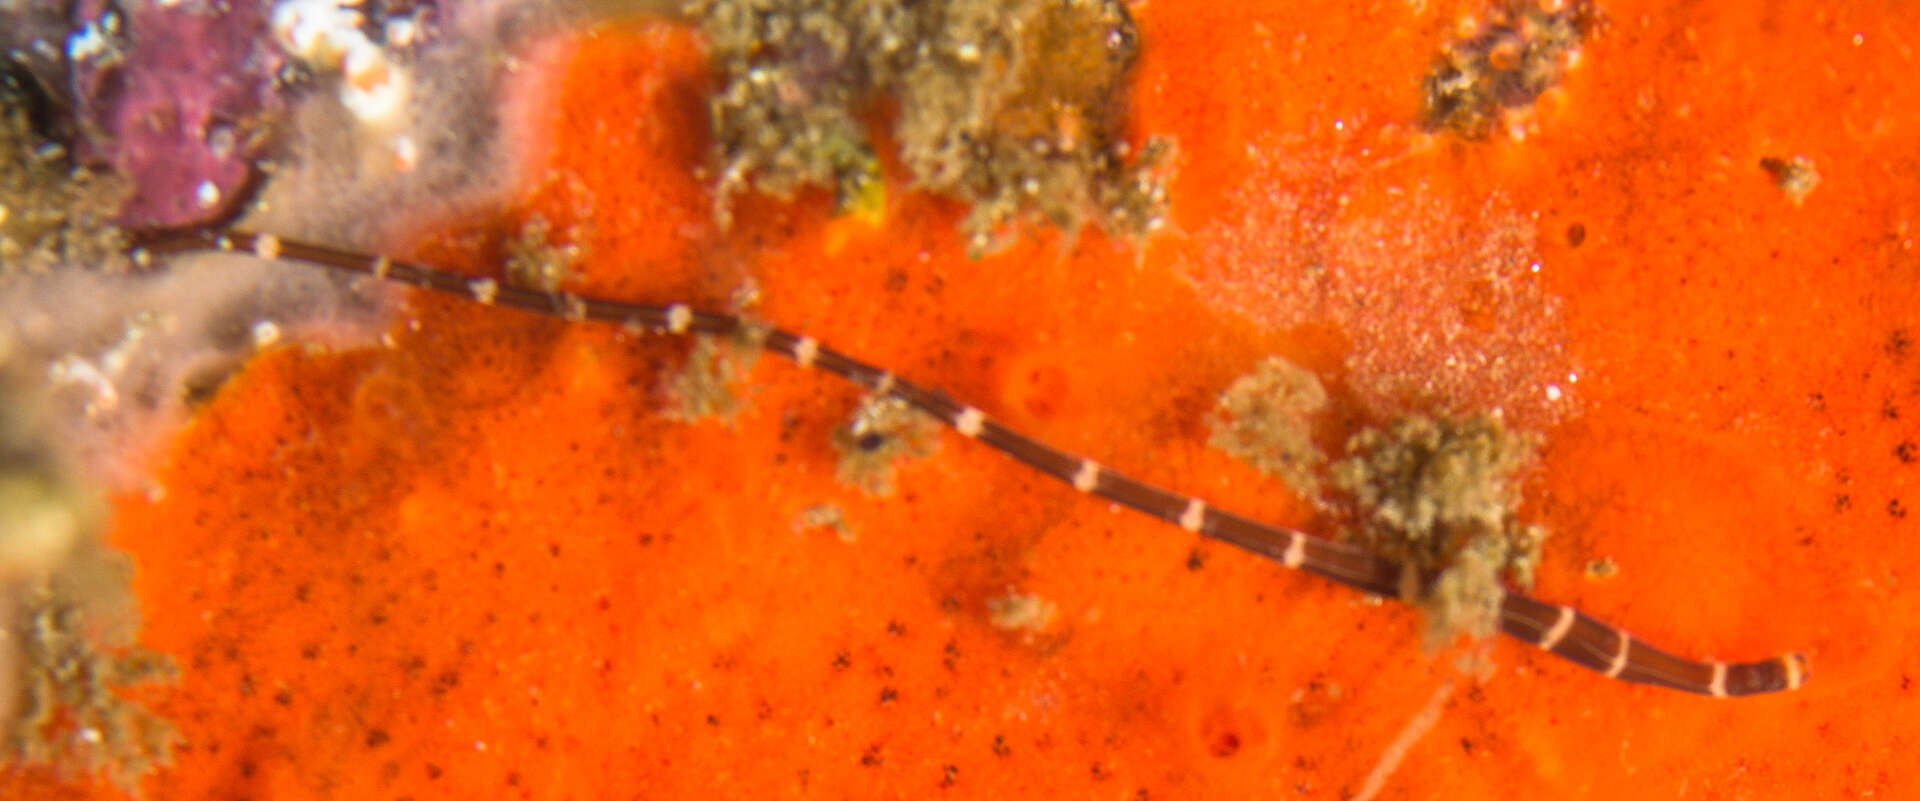 Image of football Jersey worm